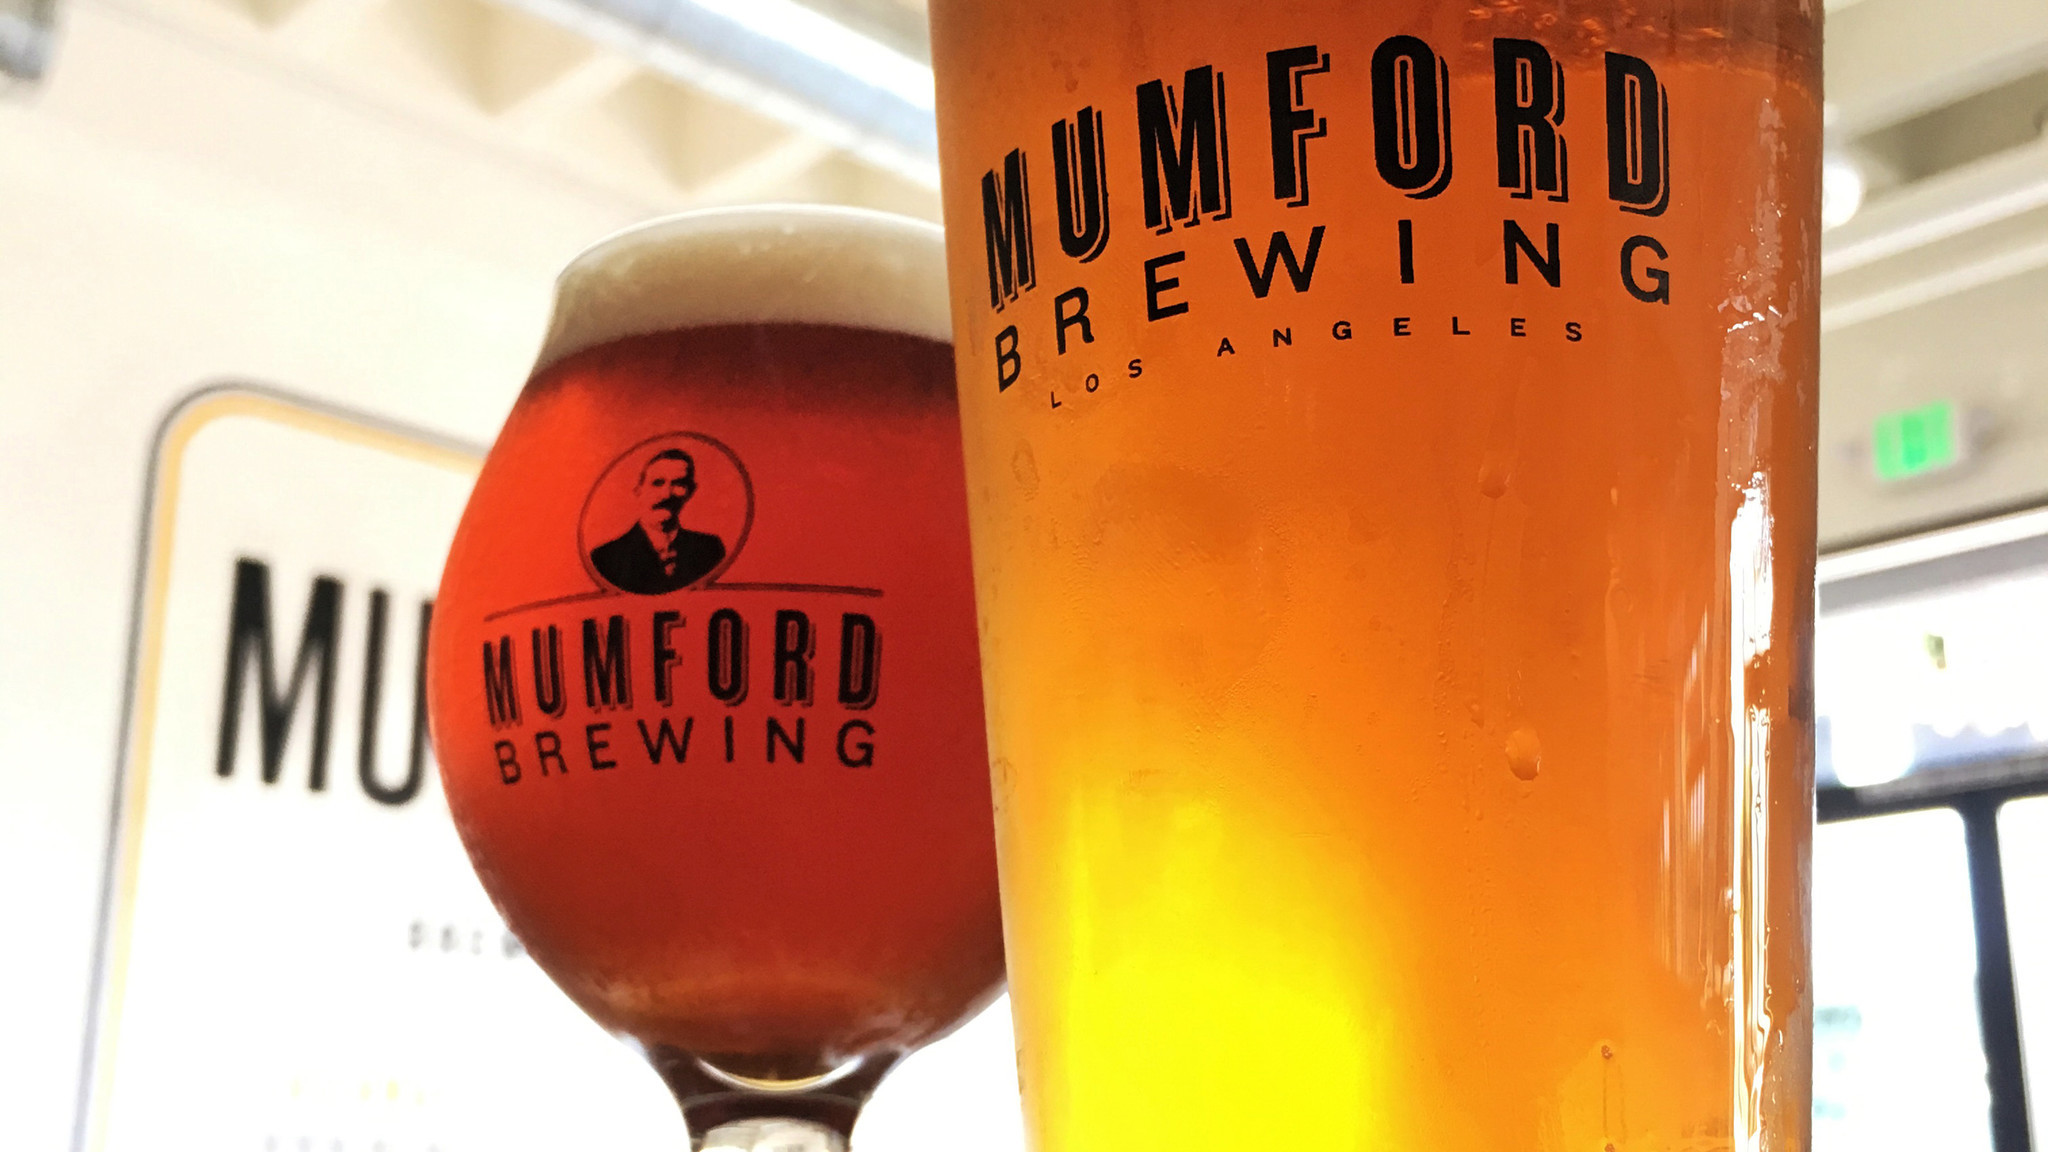 Mumford Brewing, half a mile west of the Arts District in downtown Los Angeles